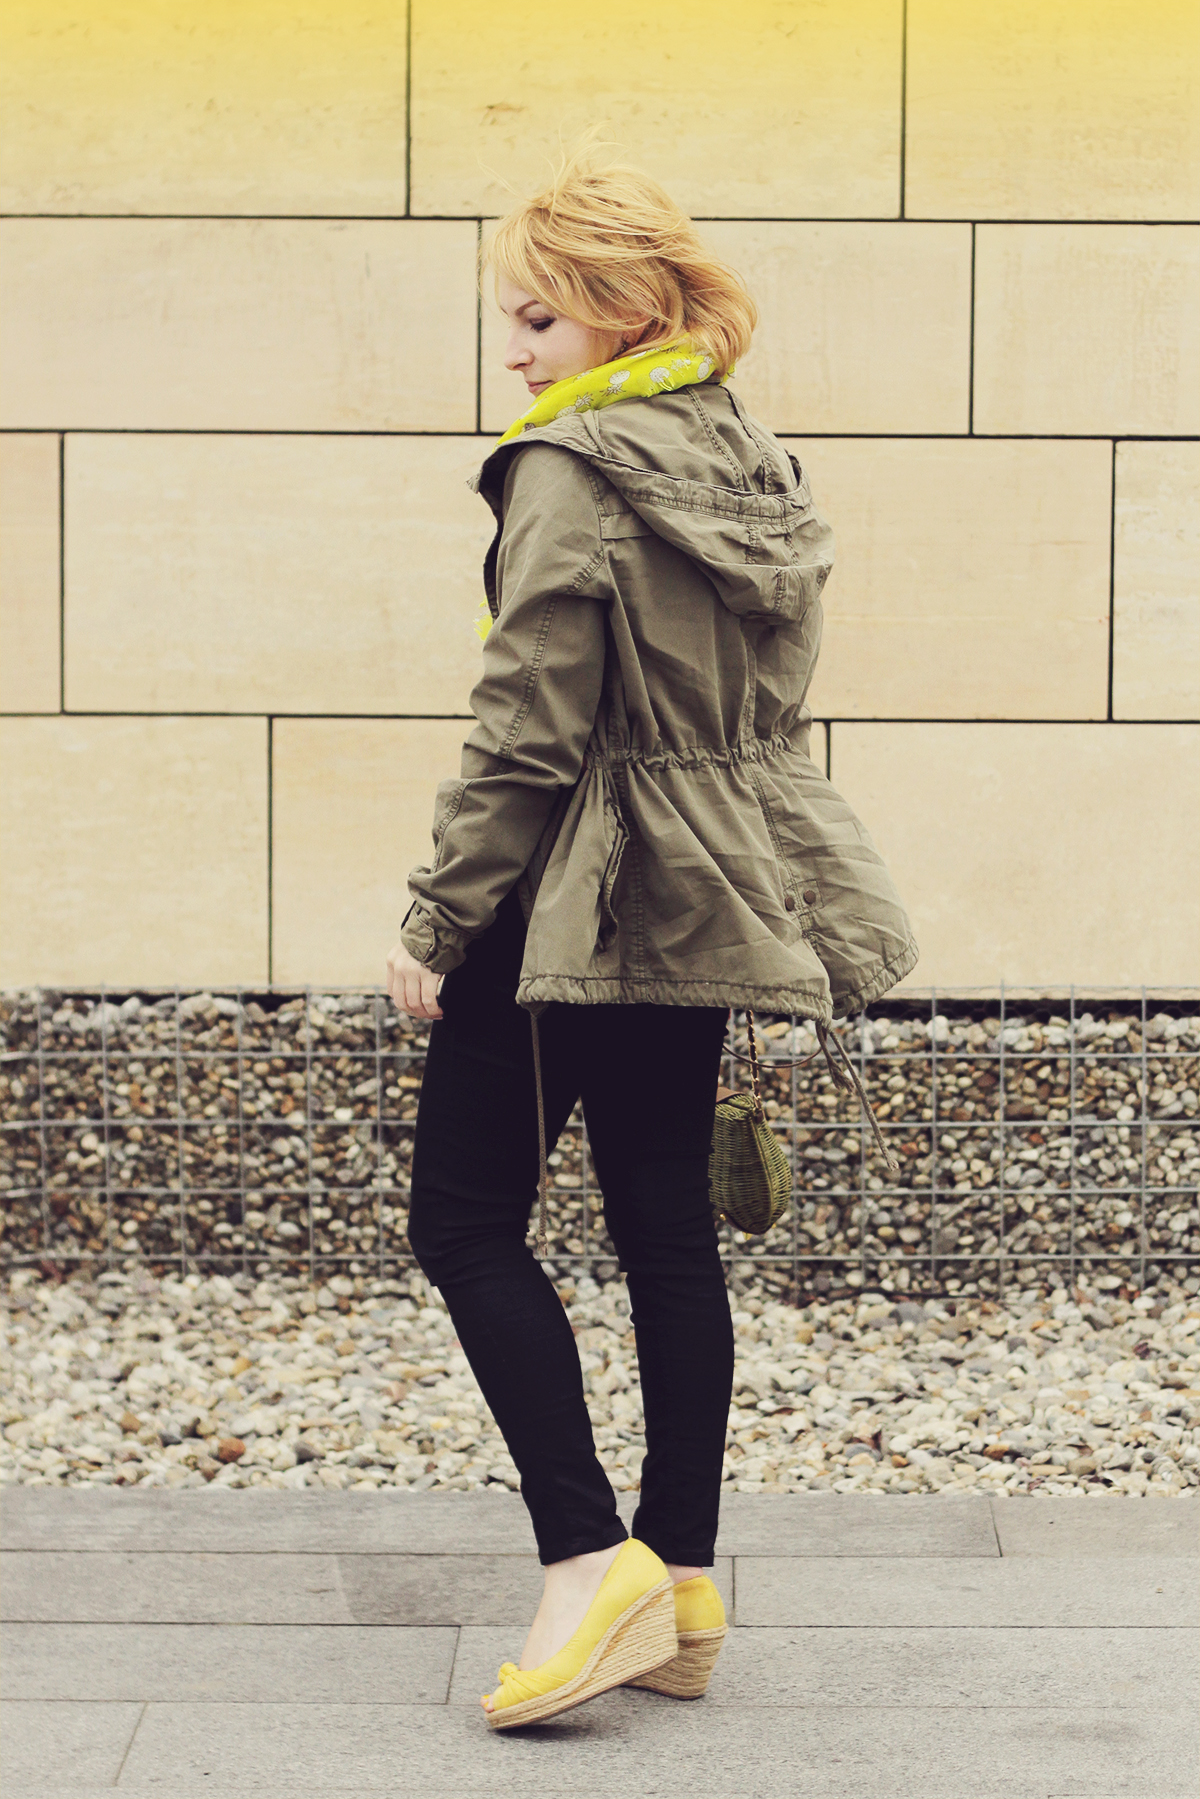 yellow wedges and parka jacket